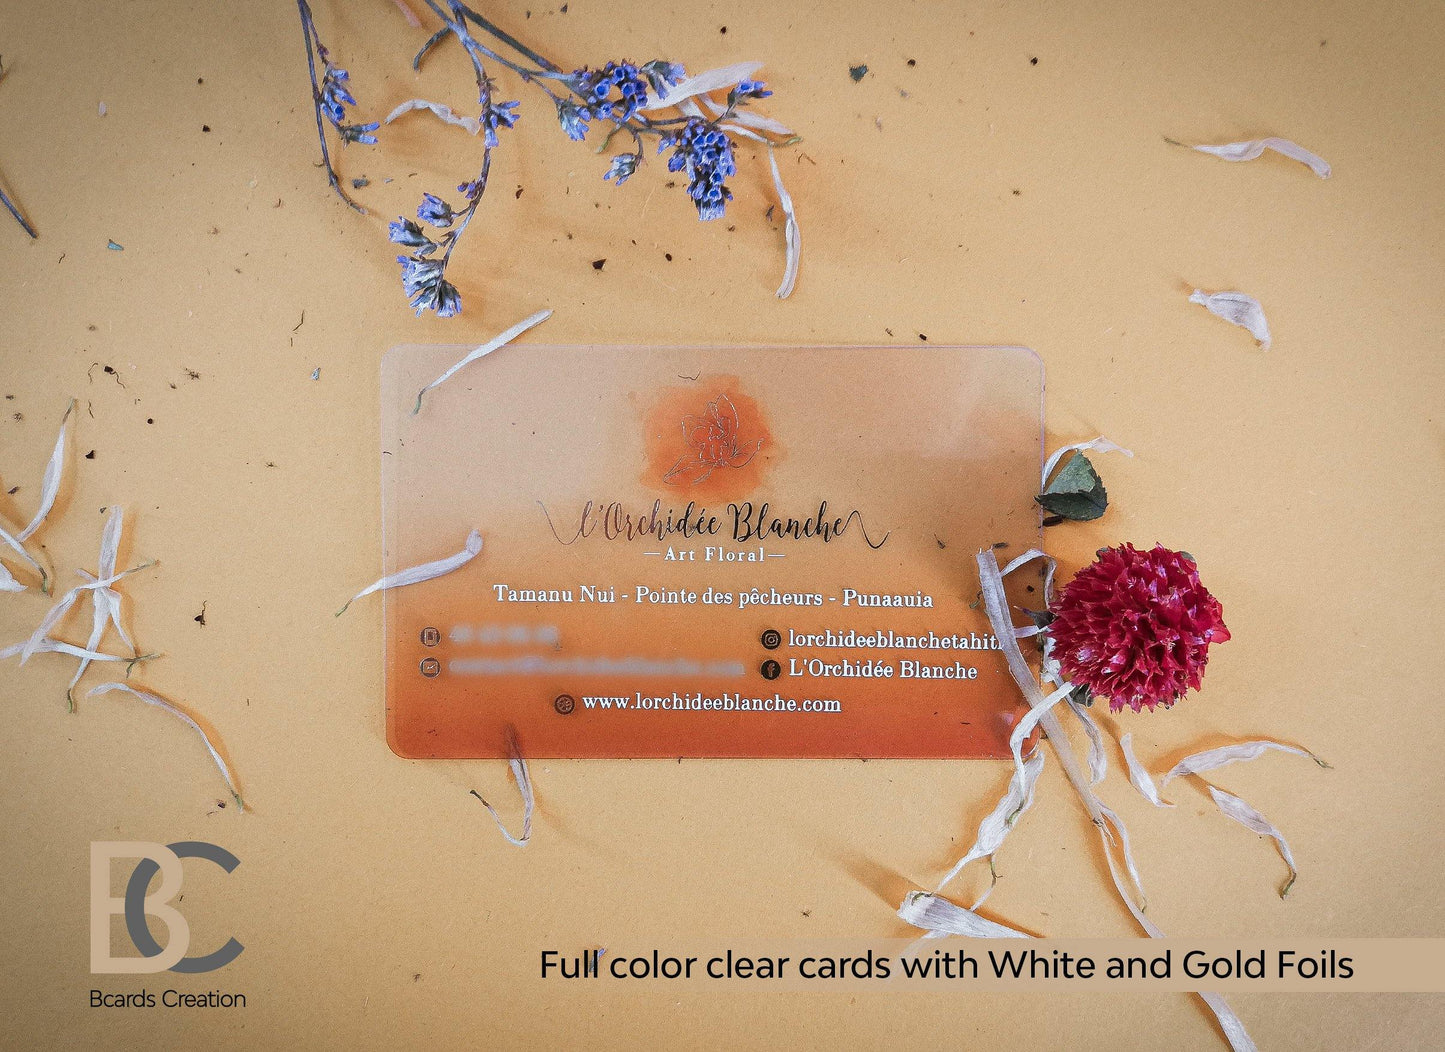 Clear Plastic Business Cards | Real Gold foil | Full color printing Clear Plastic Business Cards | Real Gold foil | Full color printing Business_cards, Clear-plastic, foil_stamping, Foiled_card, Plastic_Cards, transparent Transparent Business Cards